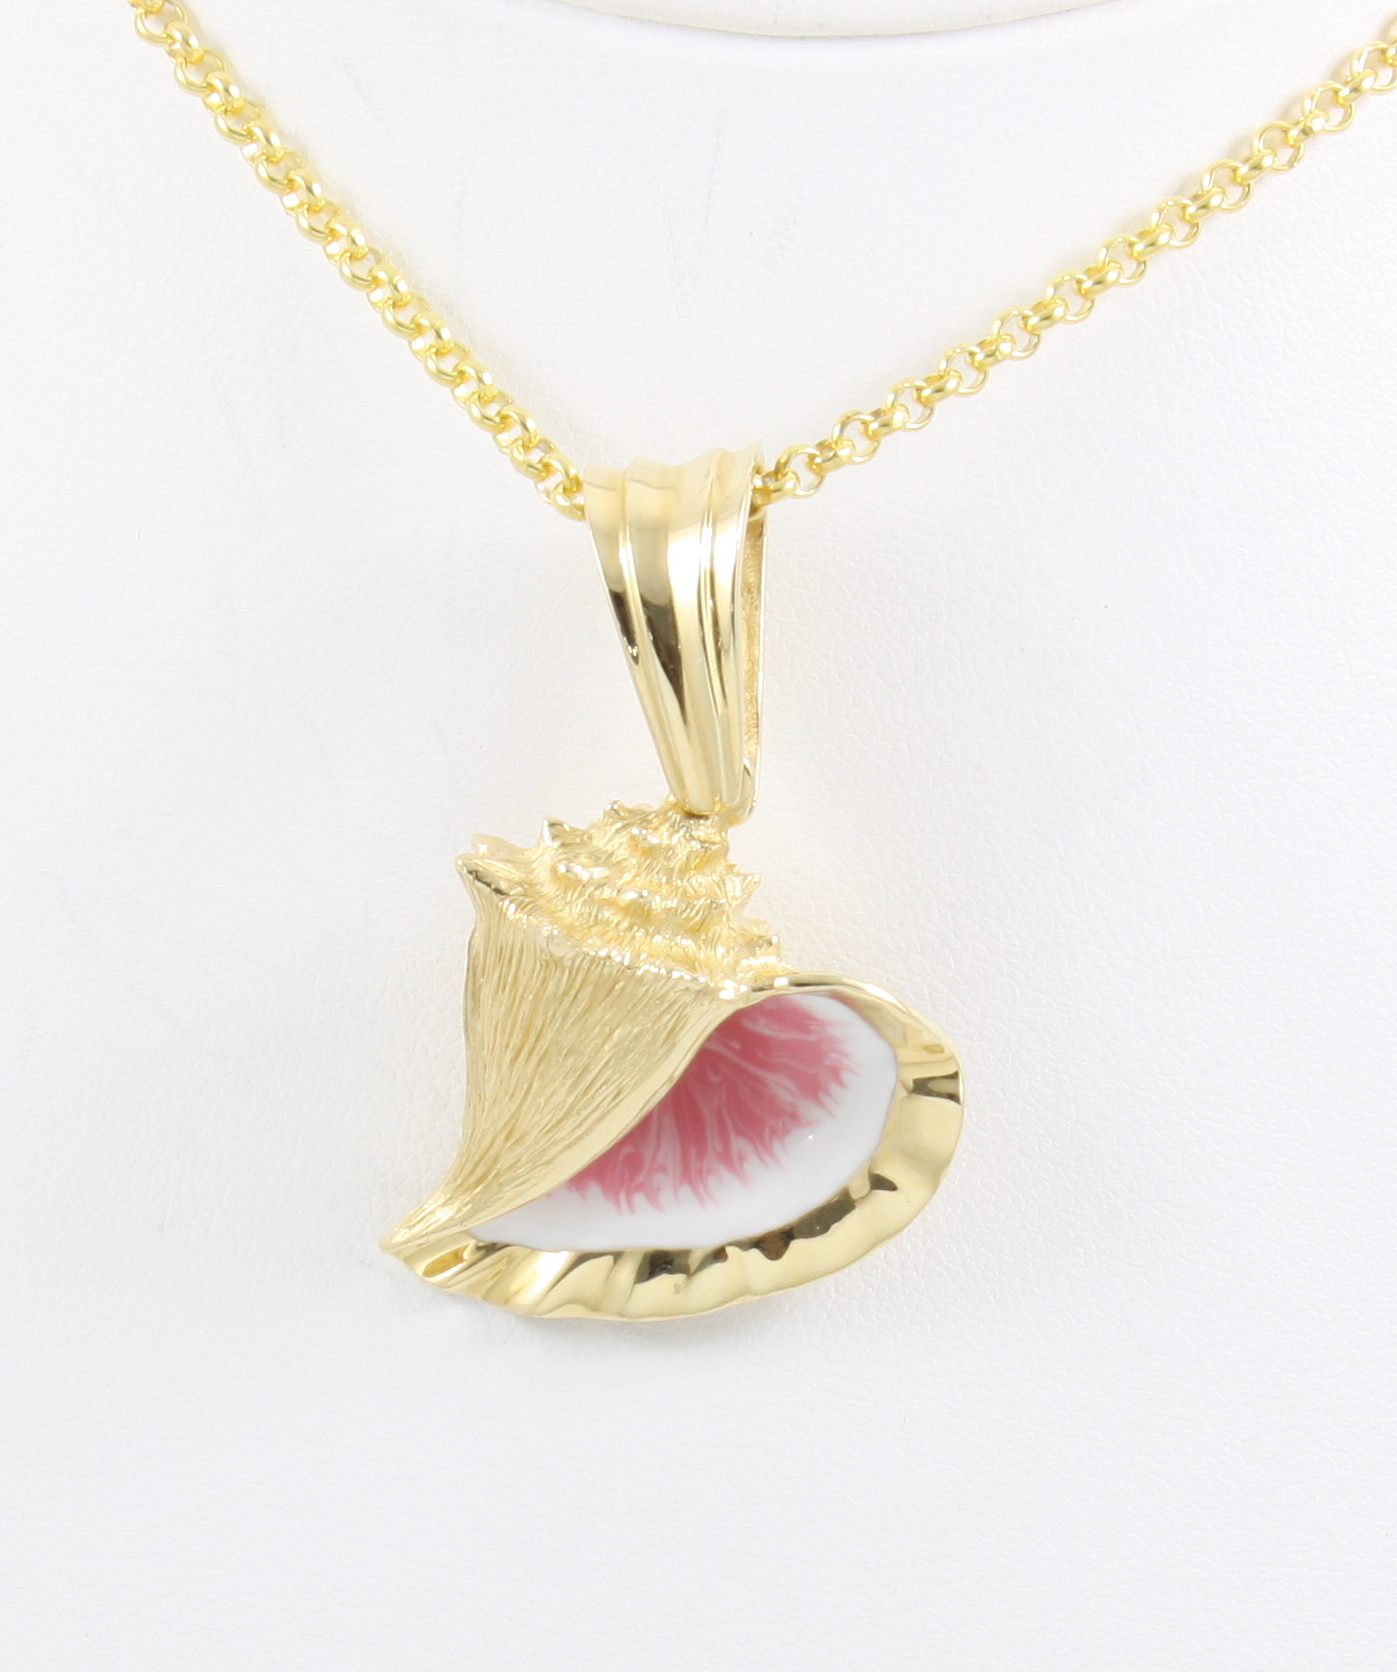 Conch Shell Necklace Gold | vlr.eng.br